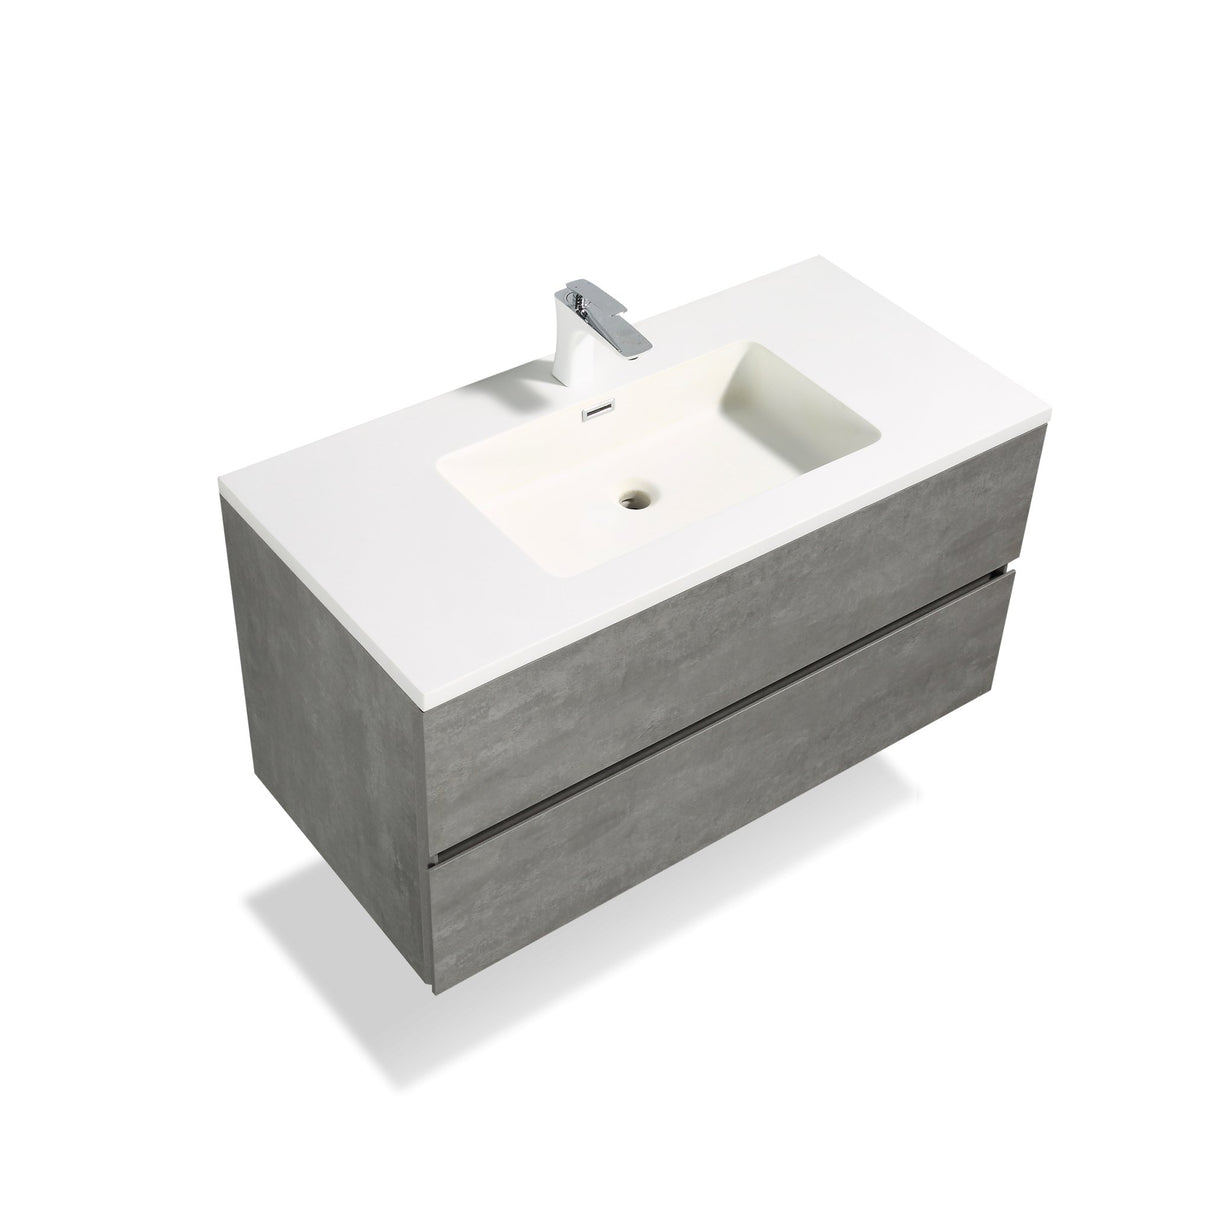 35'' Wall Mounted Single Bathroom Vanity in Ash Gray With White Solid Surface Vanity Top